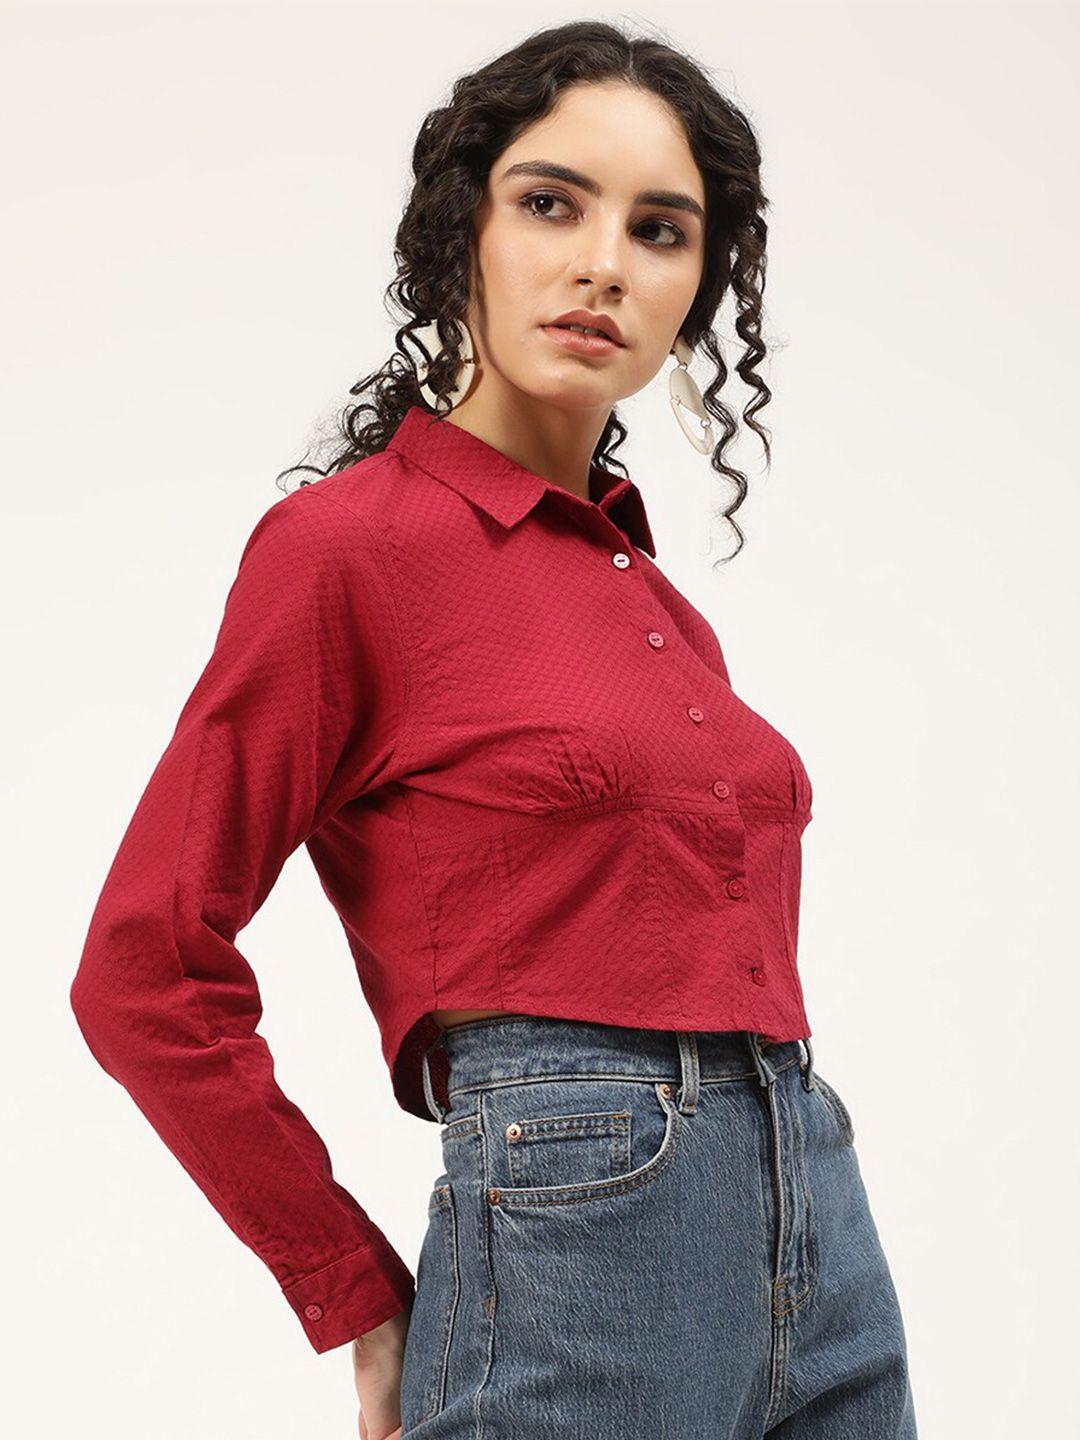 elle women red shirt style top